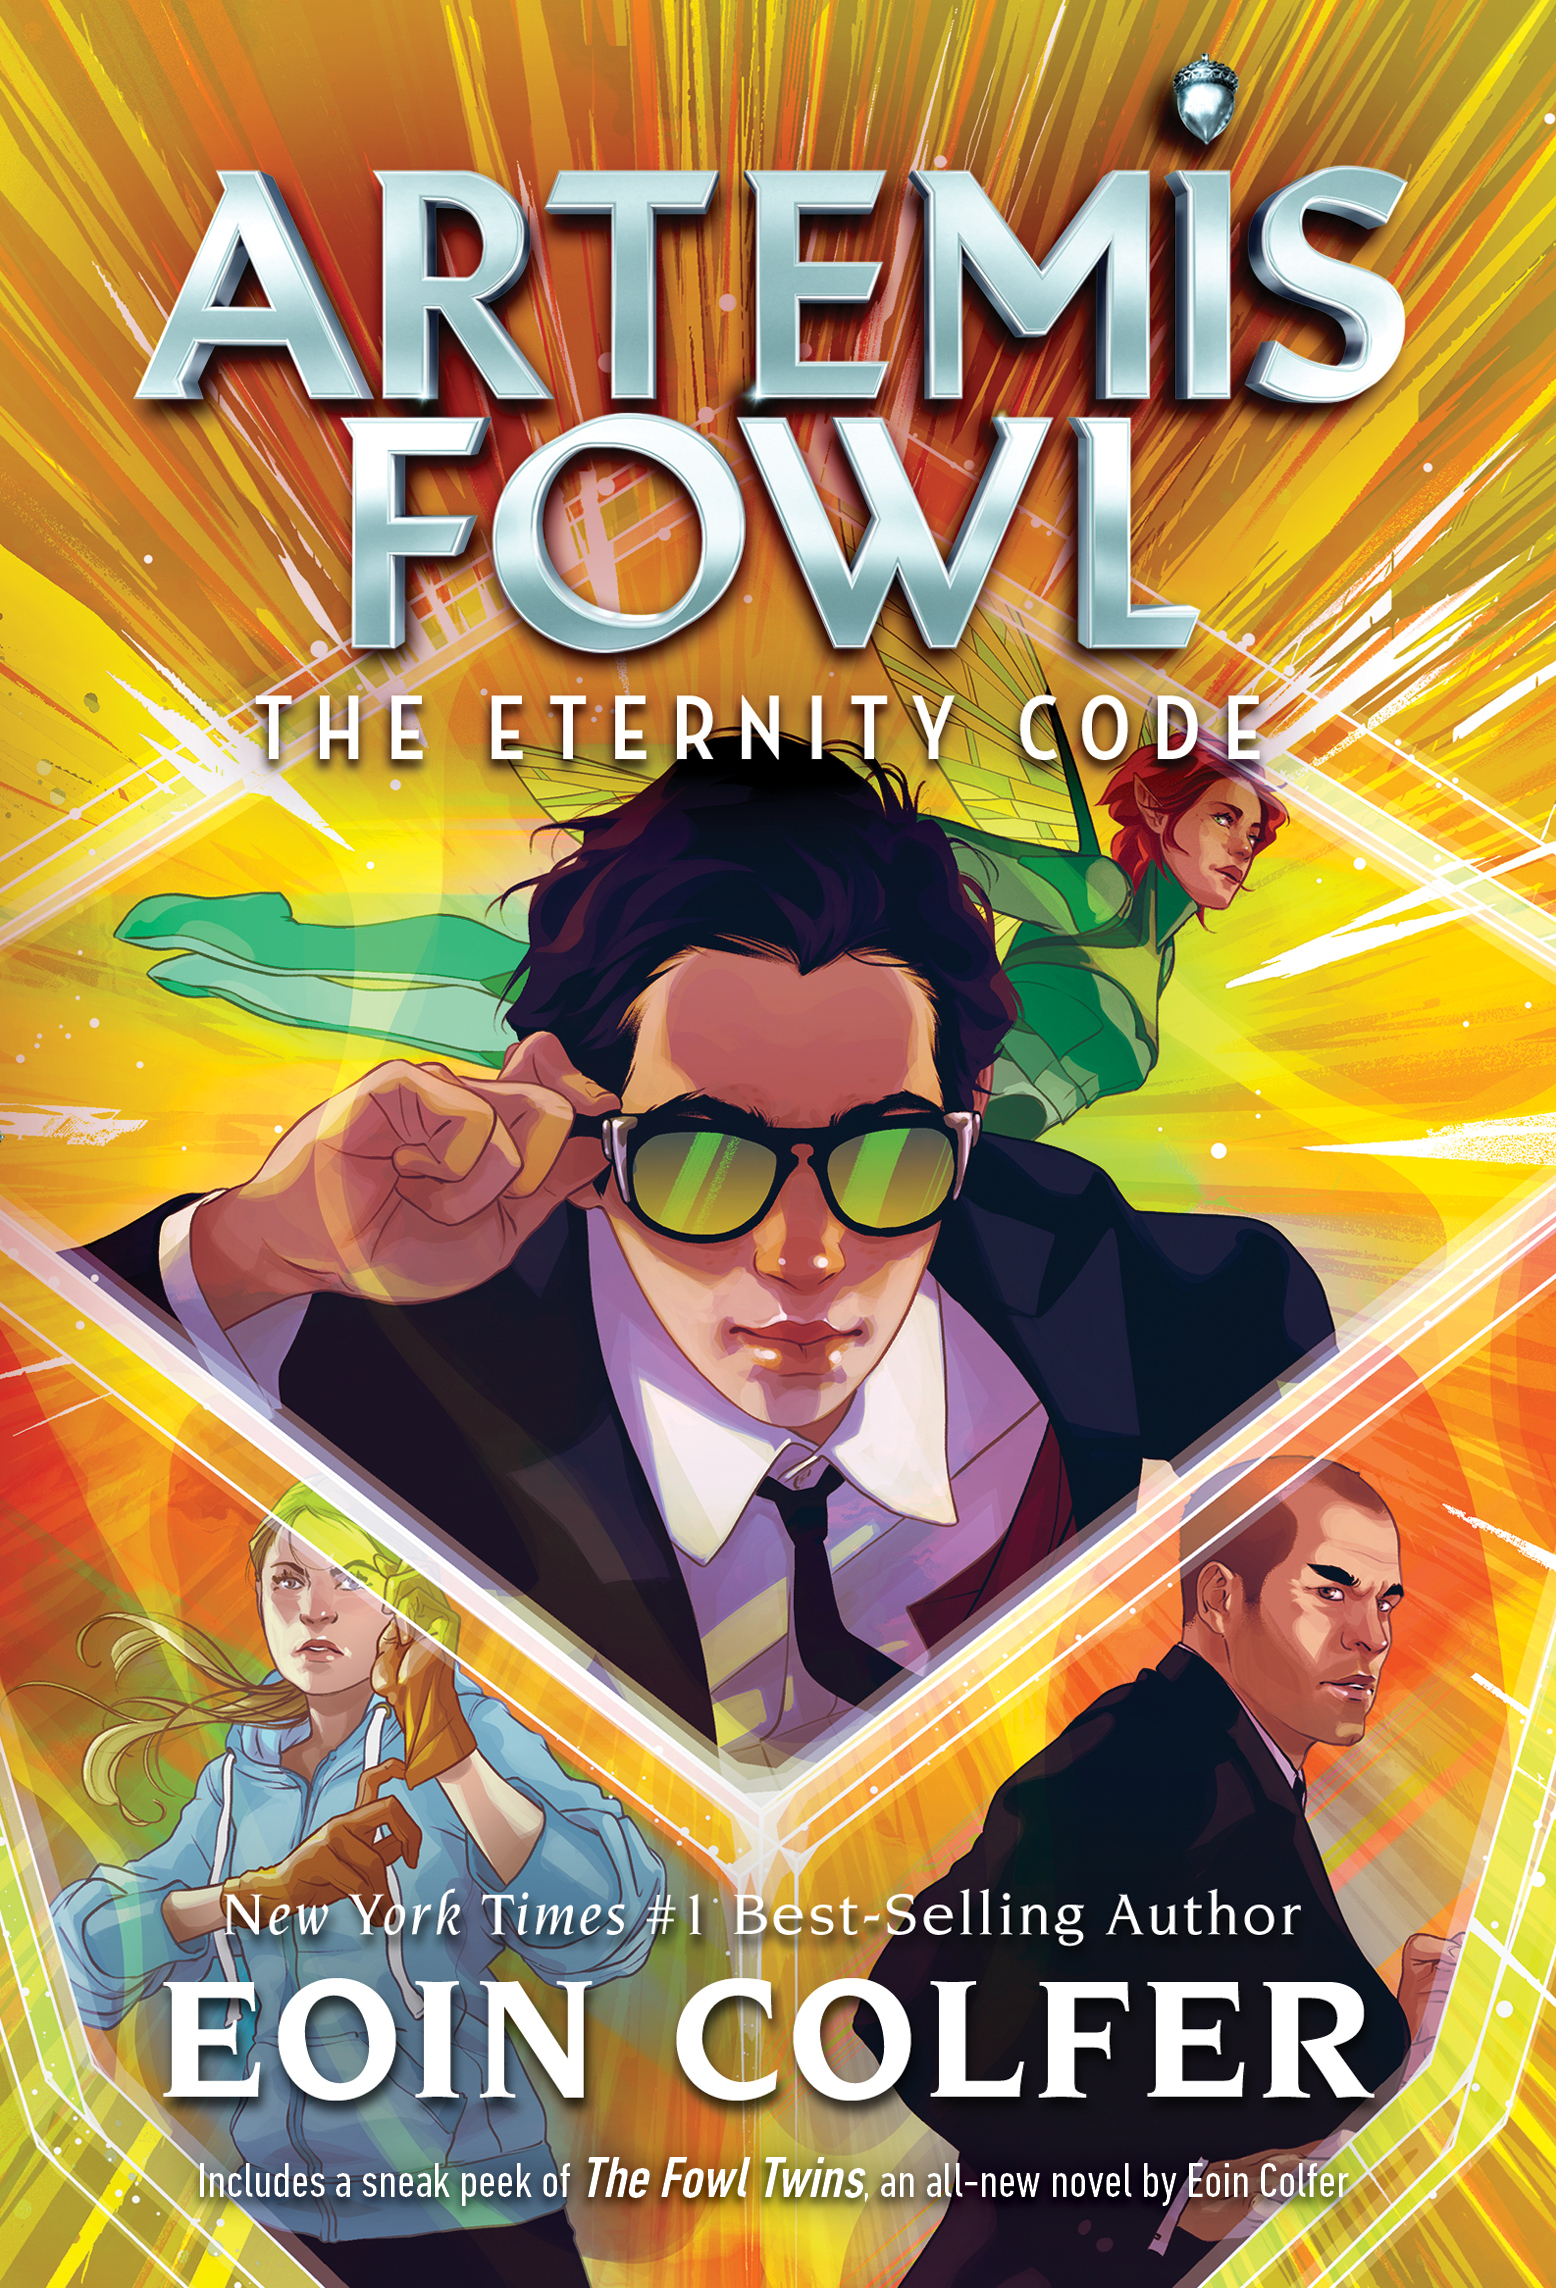 Artemis Fowl Series 8 Books Collection Set - Eoin Colfer